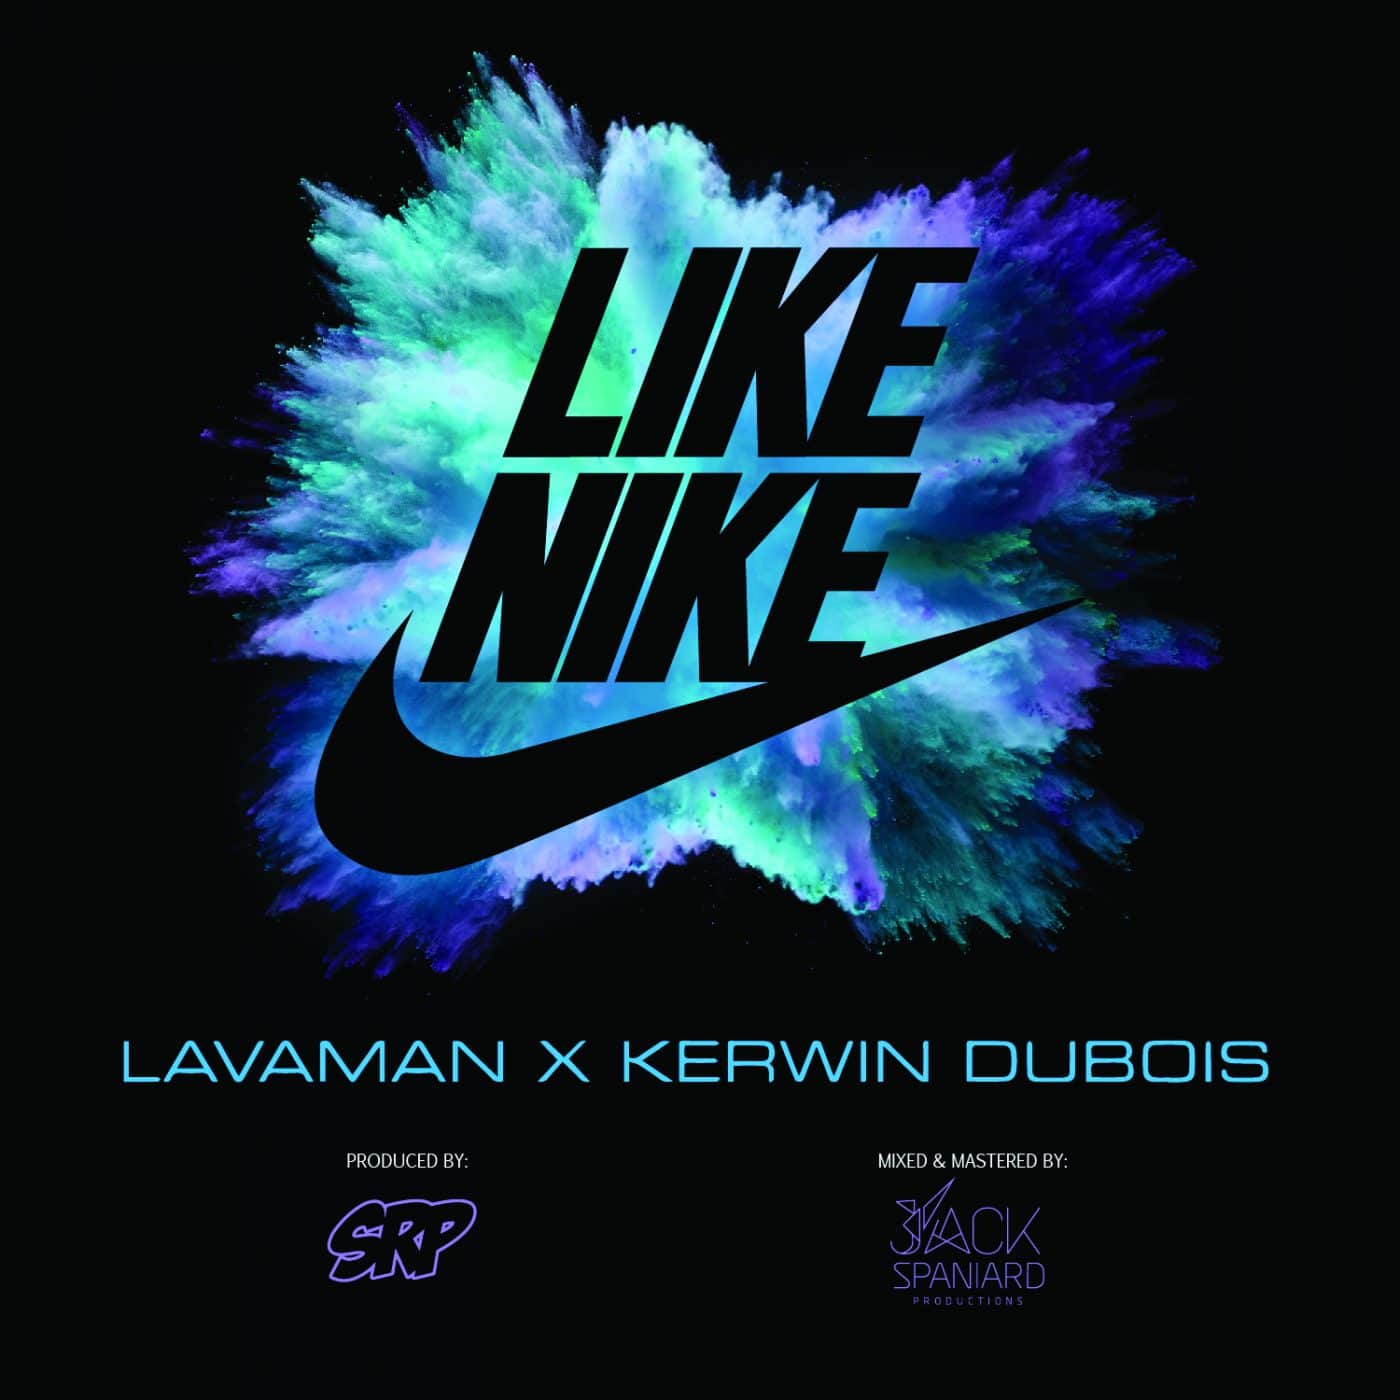 LIKE NIKE - Lavaman and Kerwin Du Bois - Produced by: SRP Productions